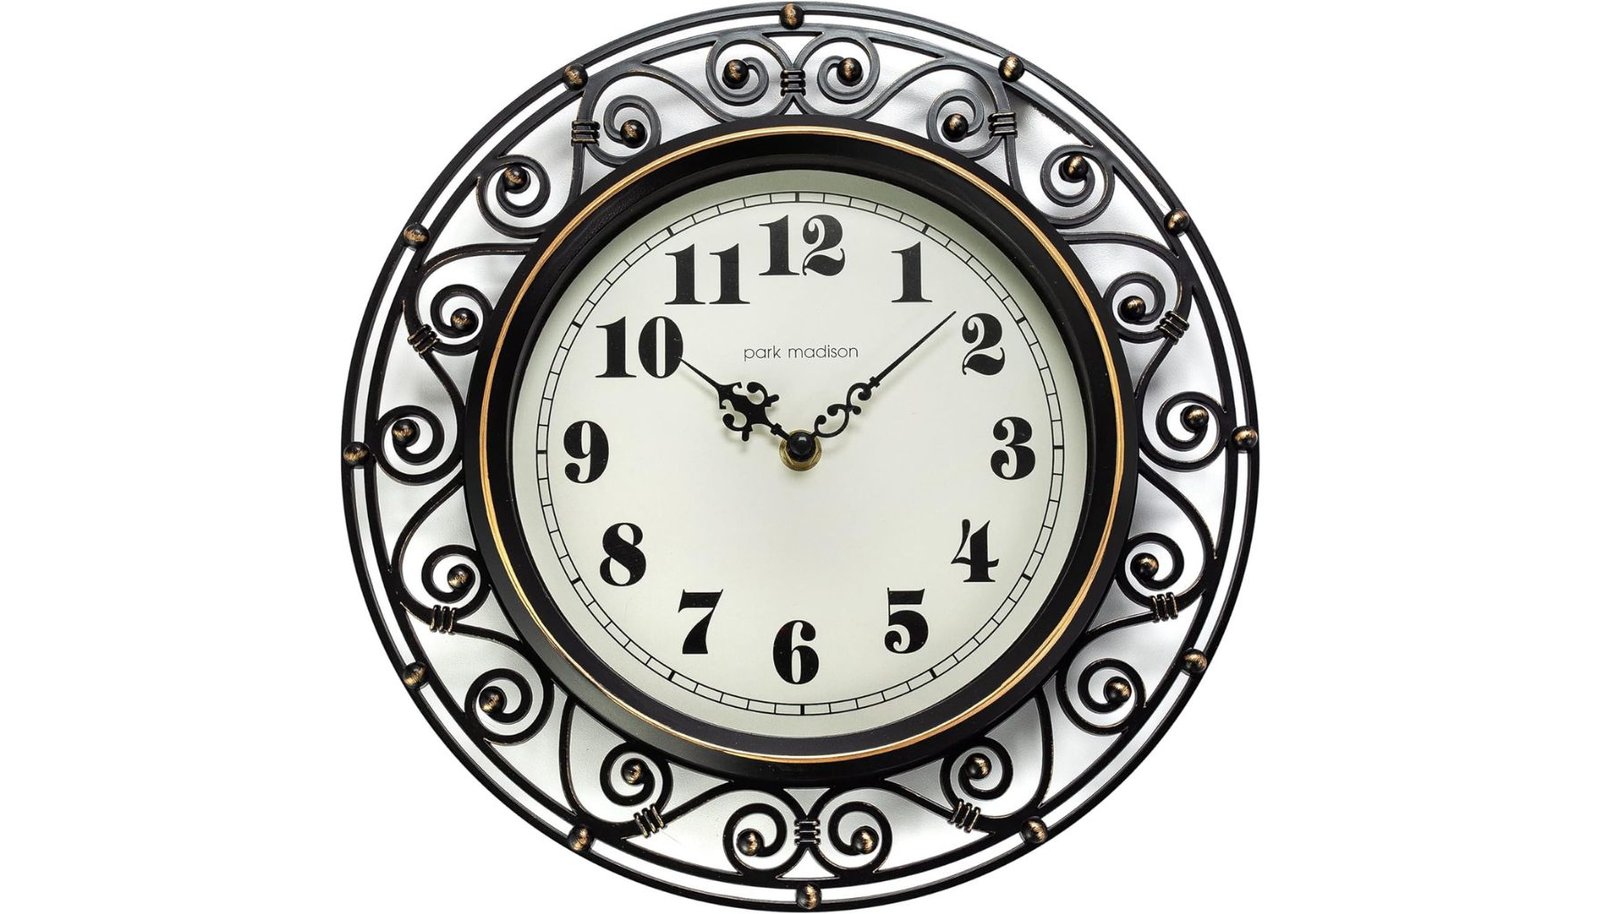 Park Madison 12 Inch Vintage Elegant Decorative Iron Style Office Room Wall Clock Review